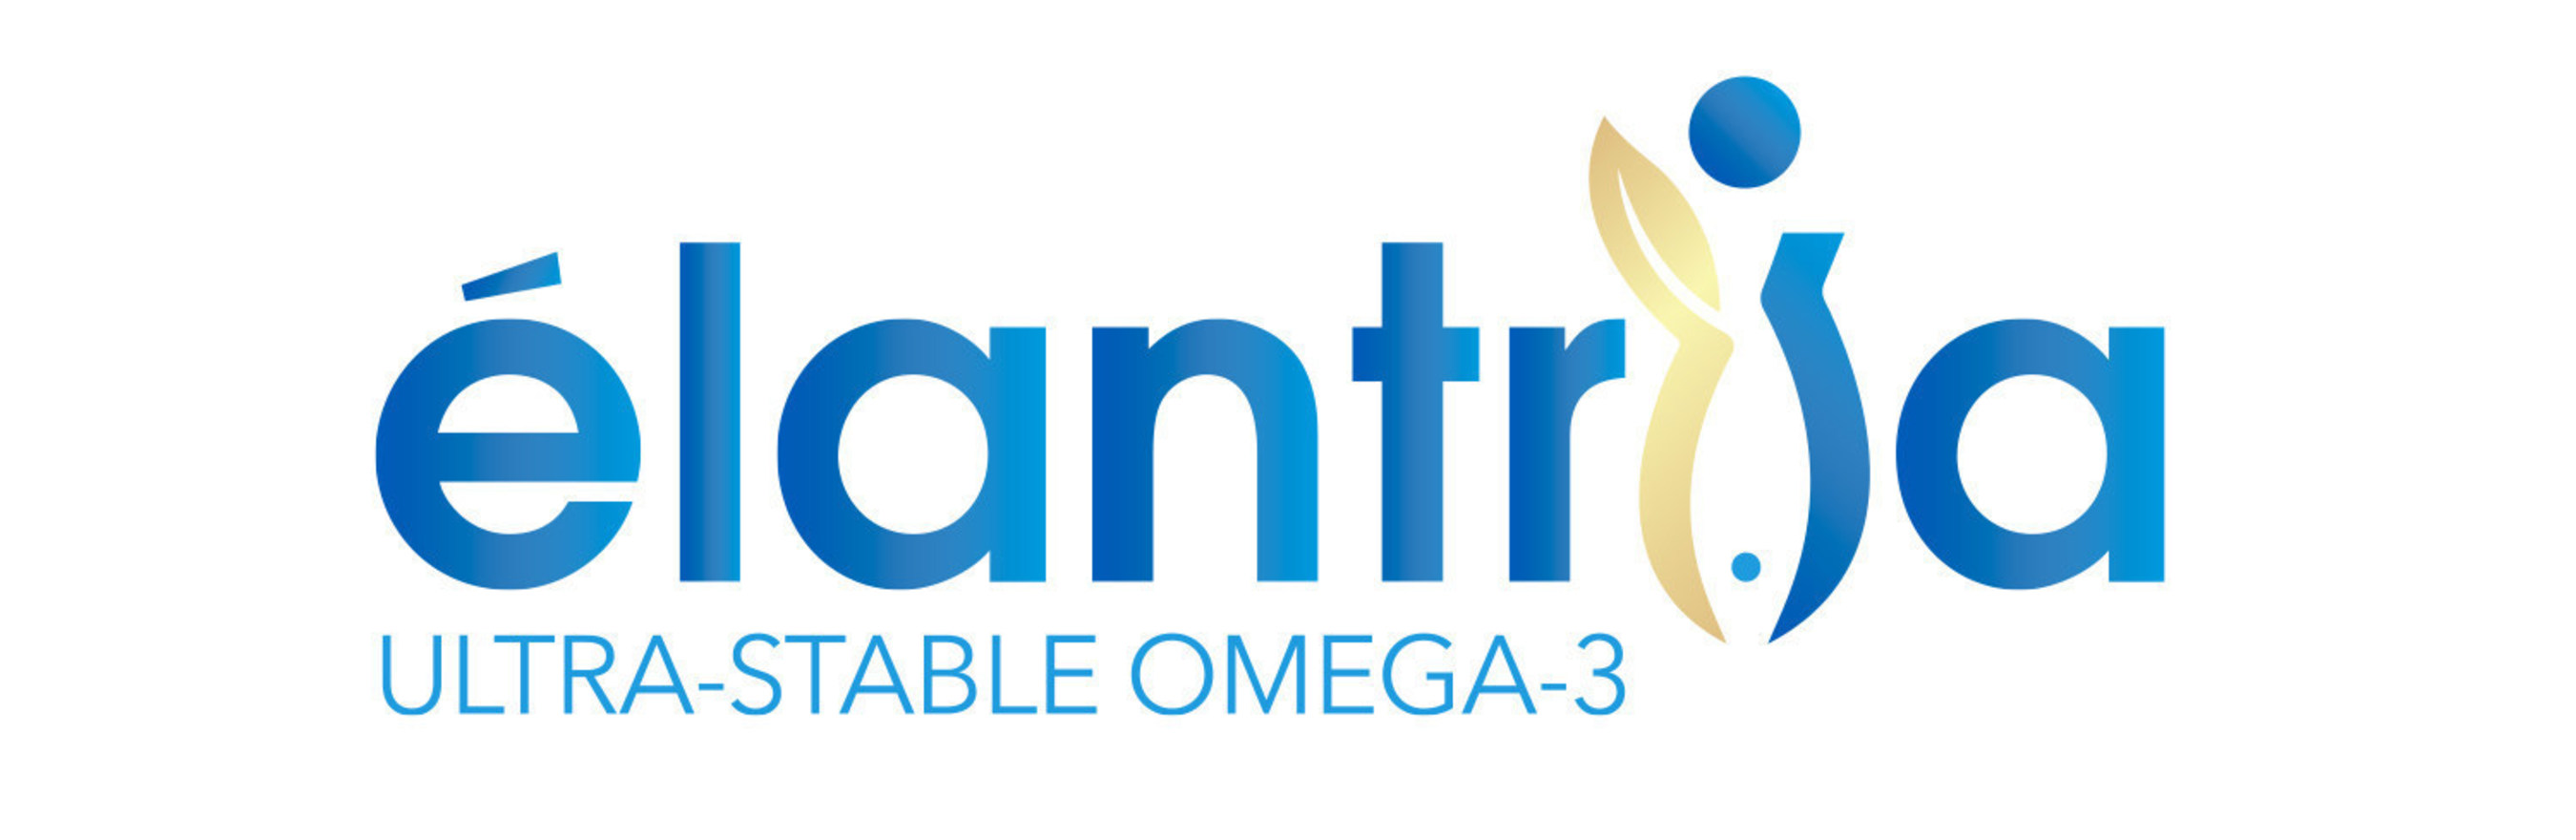 elantria Ultra-Stable Omega-3 oils feature food-grade raw materials, cutting-edge purification, deodorization and concentration technologies and a proprietary QualitySilver(R) stabilization process that sets new standards for stability and shelf life.